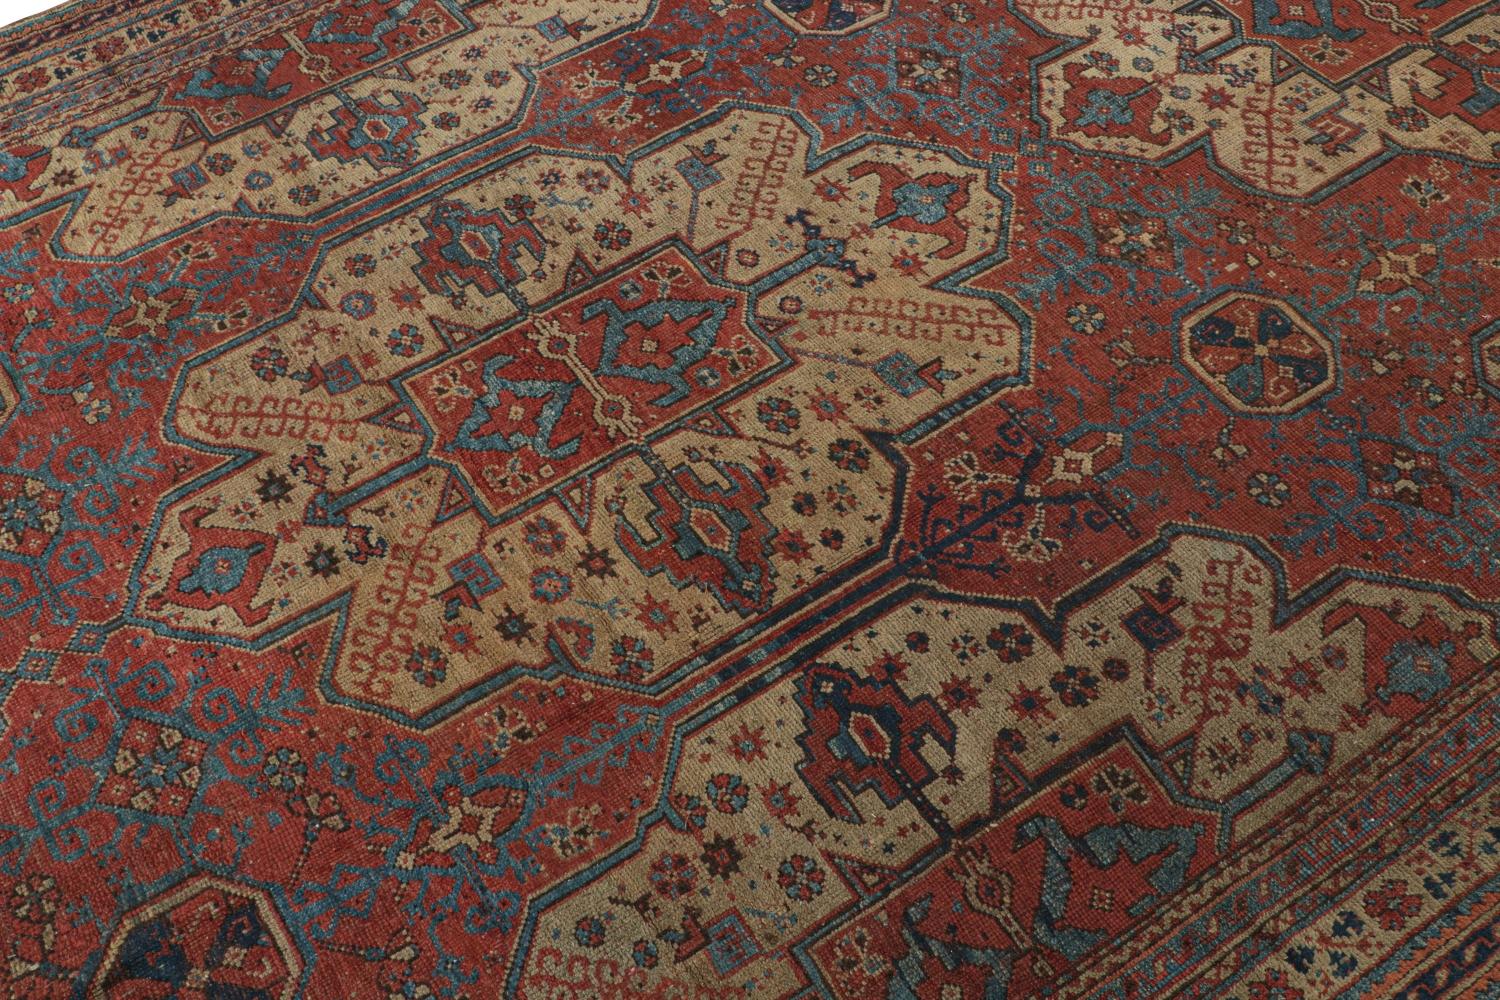 Hand-knotted in wool circa 1890-1900, this antique 13x22 Oushak is a rare oversized palace rug in the new unveilings from the Antique & Vintage Collection by Rug & Kilim.

On the Design: 

Hand-knotted in wool circa 1890-1900, its design enjoys a